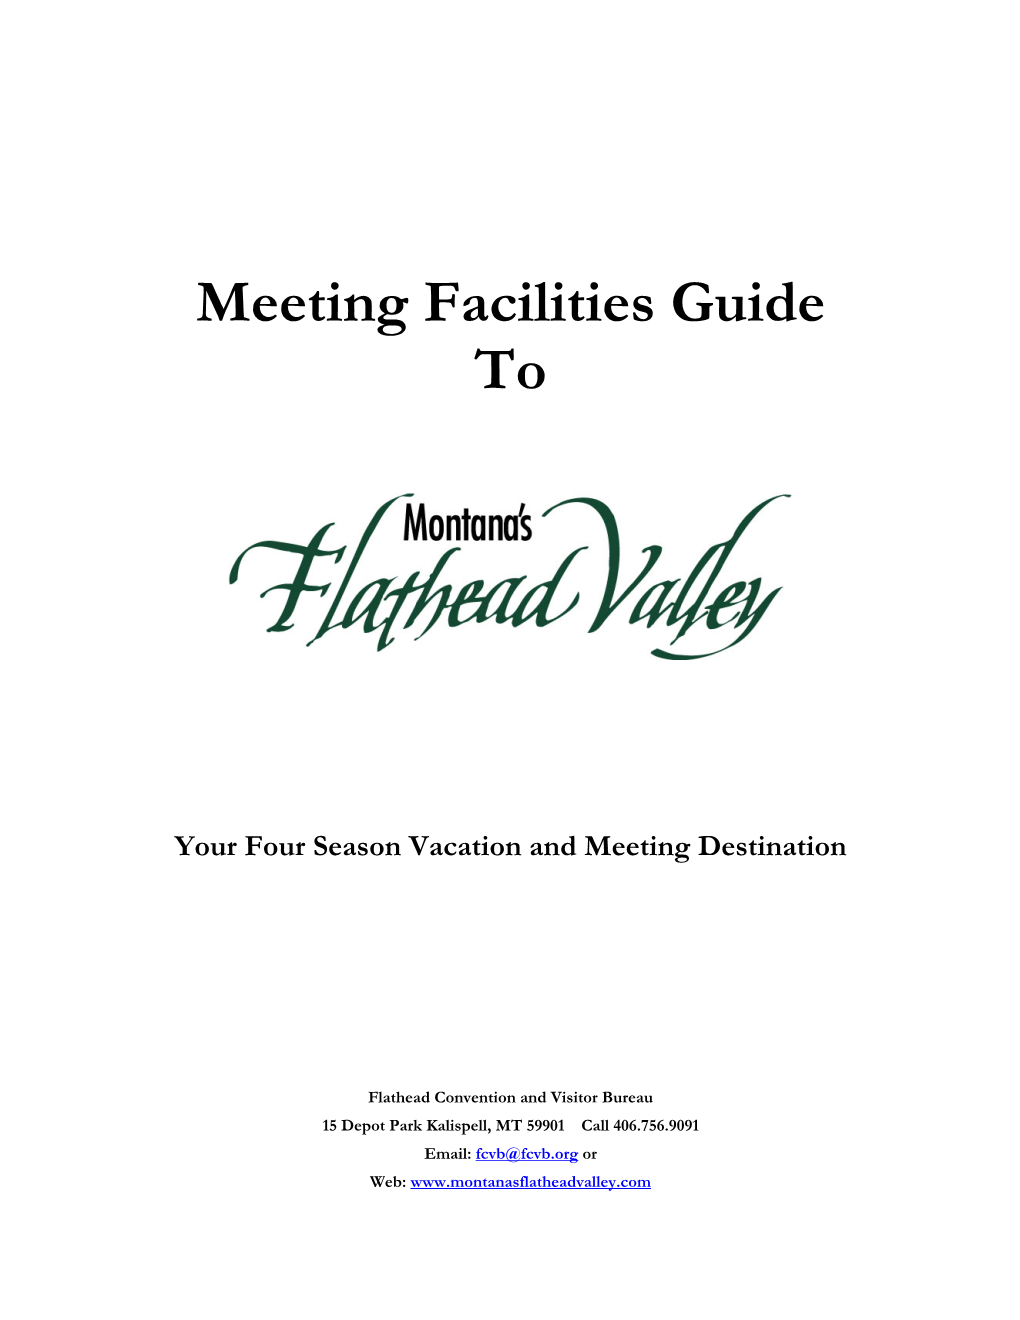 Meeting Facilities Guide To